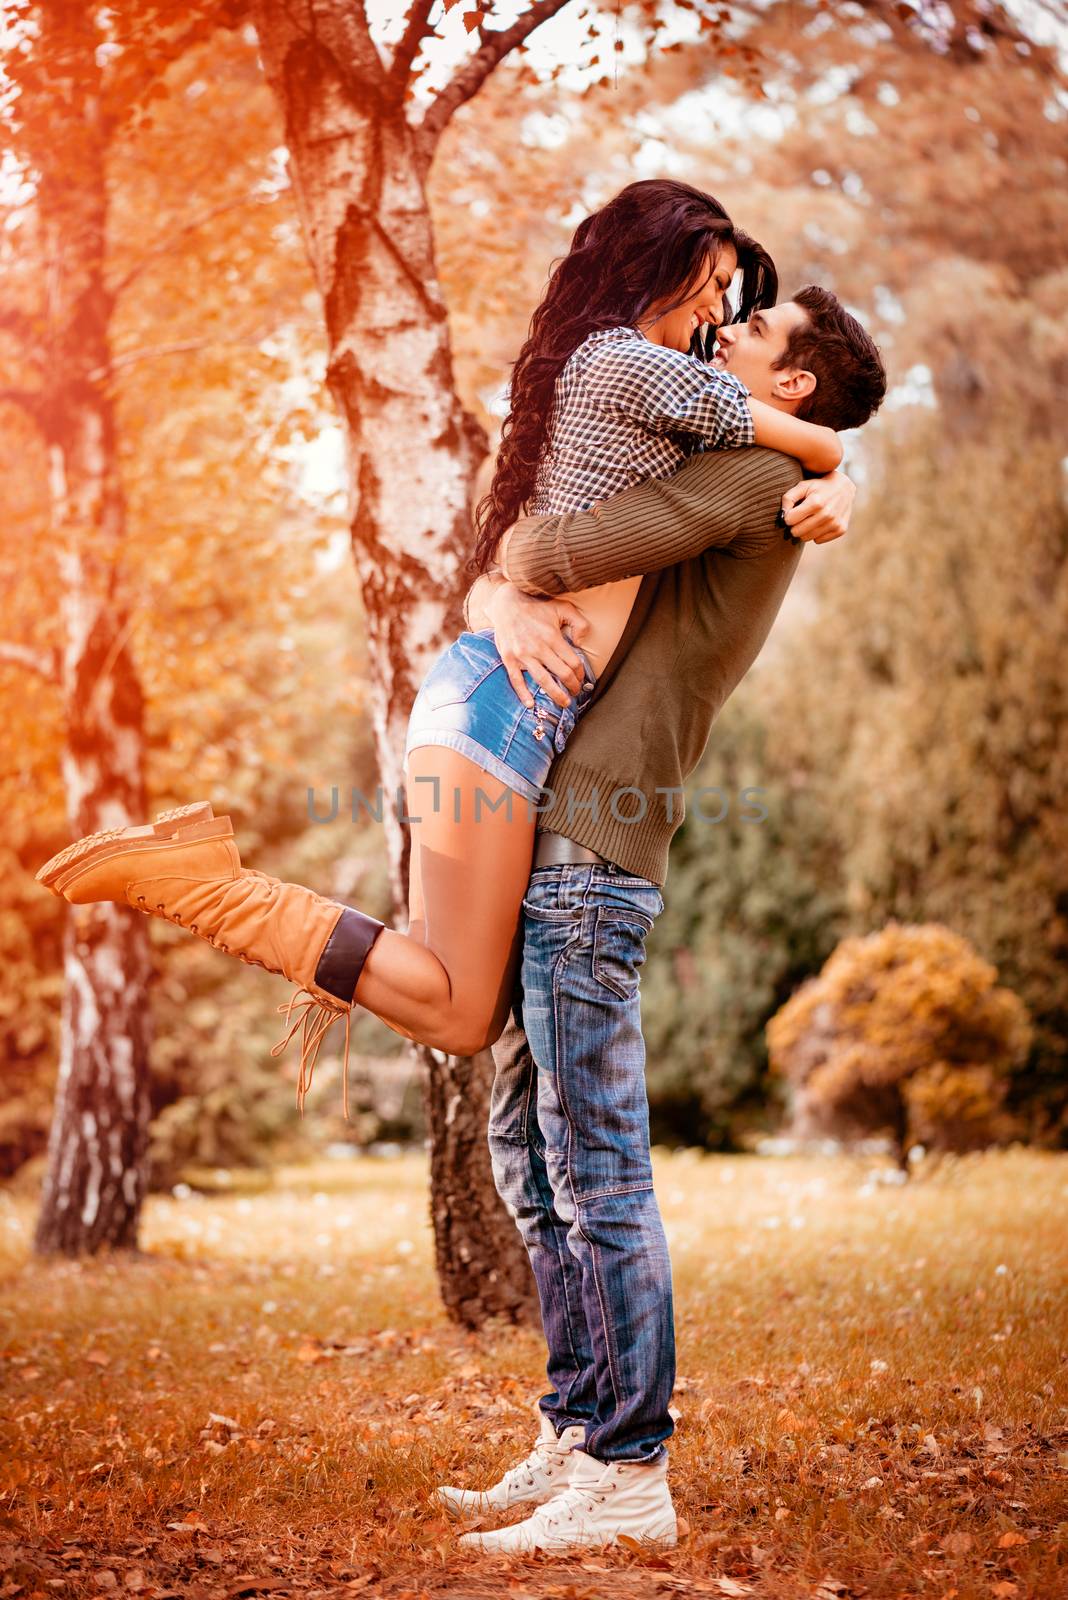 Beautiful lovely couple enjoying in sunny park in autumn colors. Guy holding girlfriend in height in a passionate embrace.